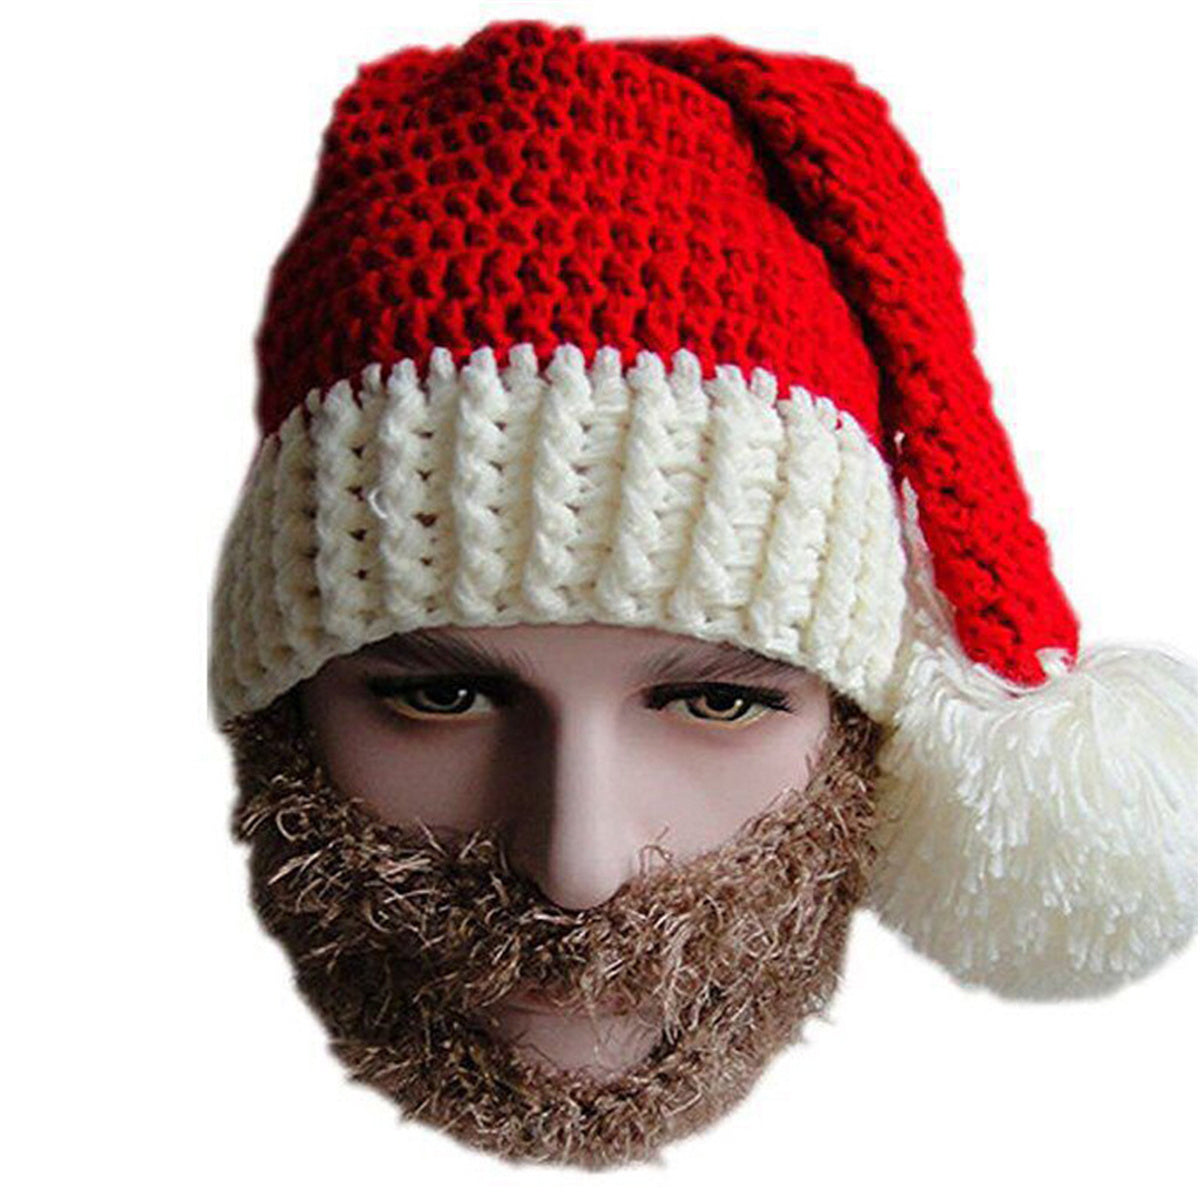 Santa's Winter Soft Knitted Beanie Hat with Beard